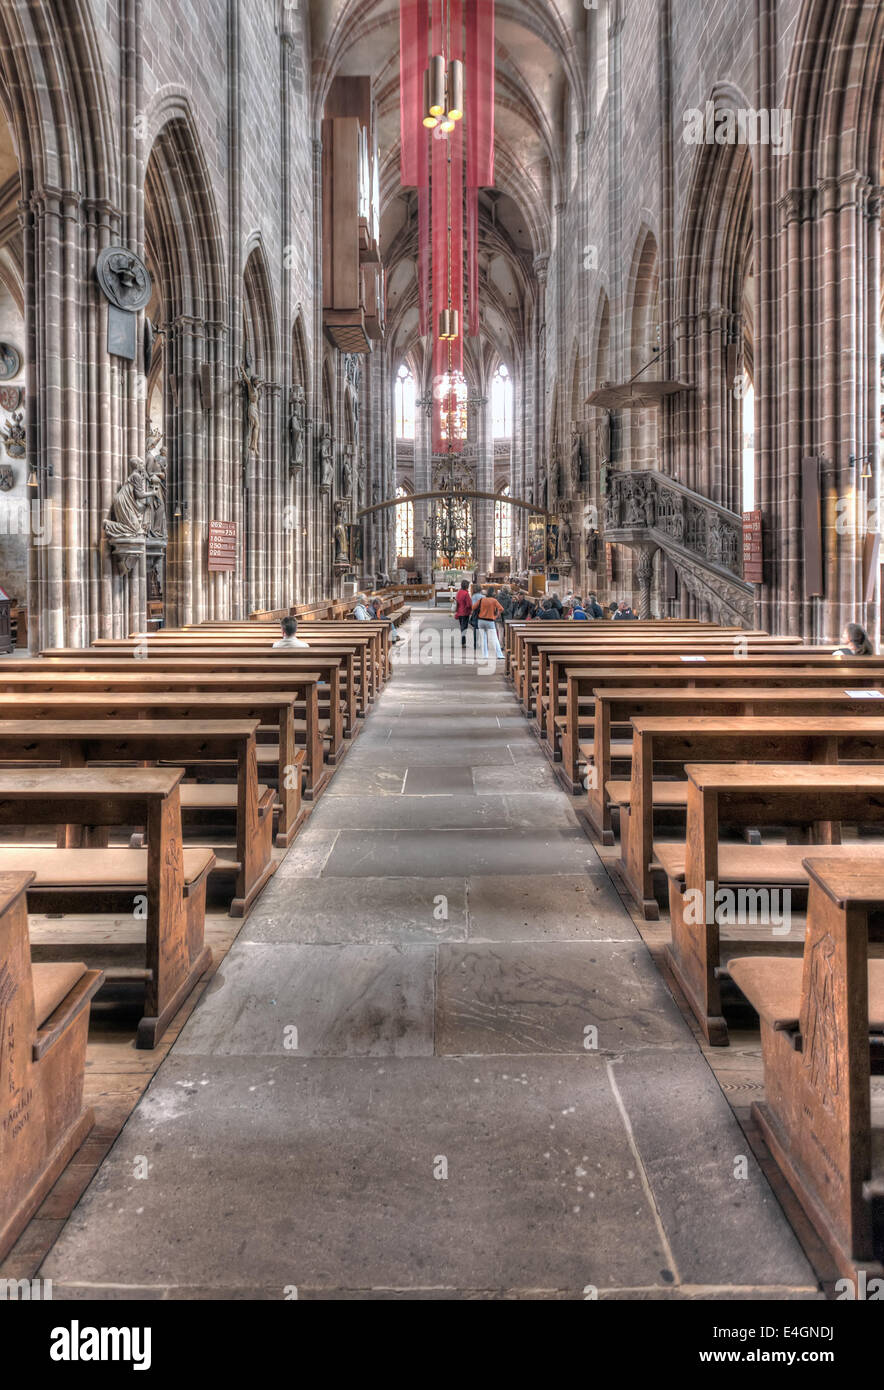 Inside the St Lorenz cathedral in Nuremberg Stock Photo